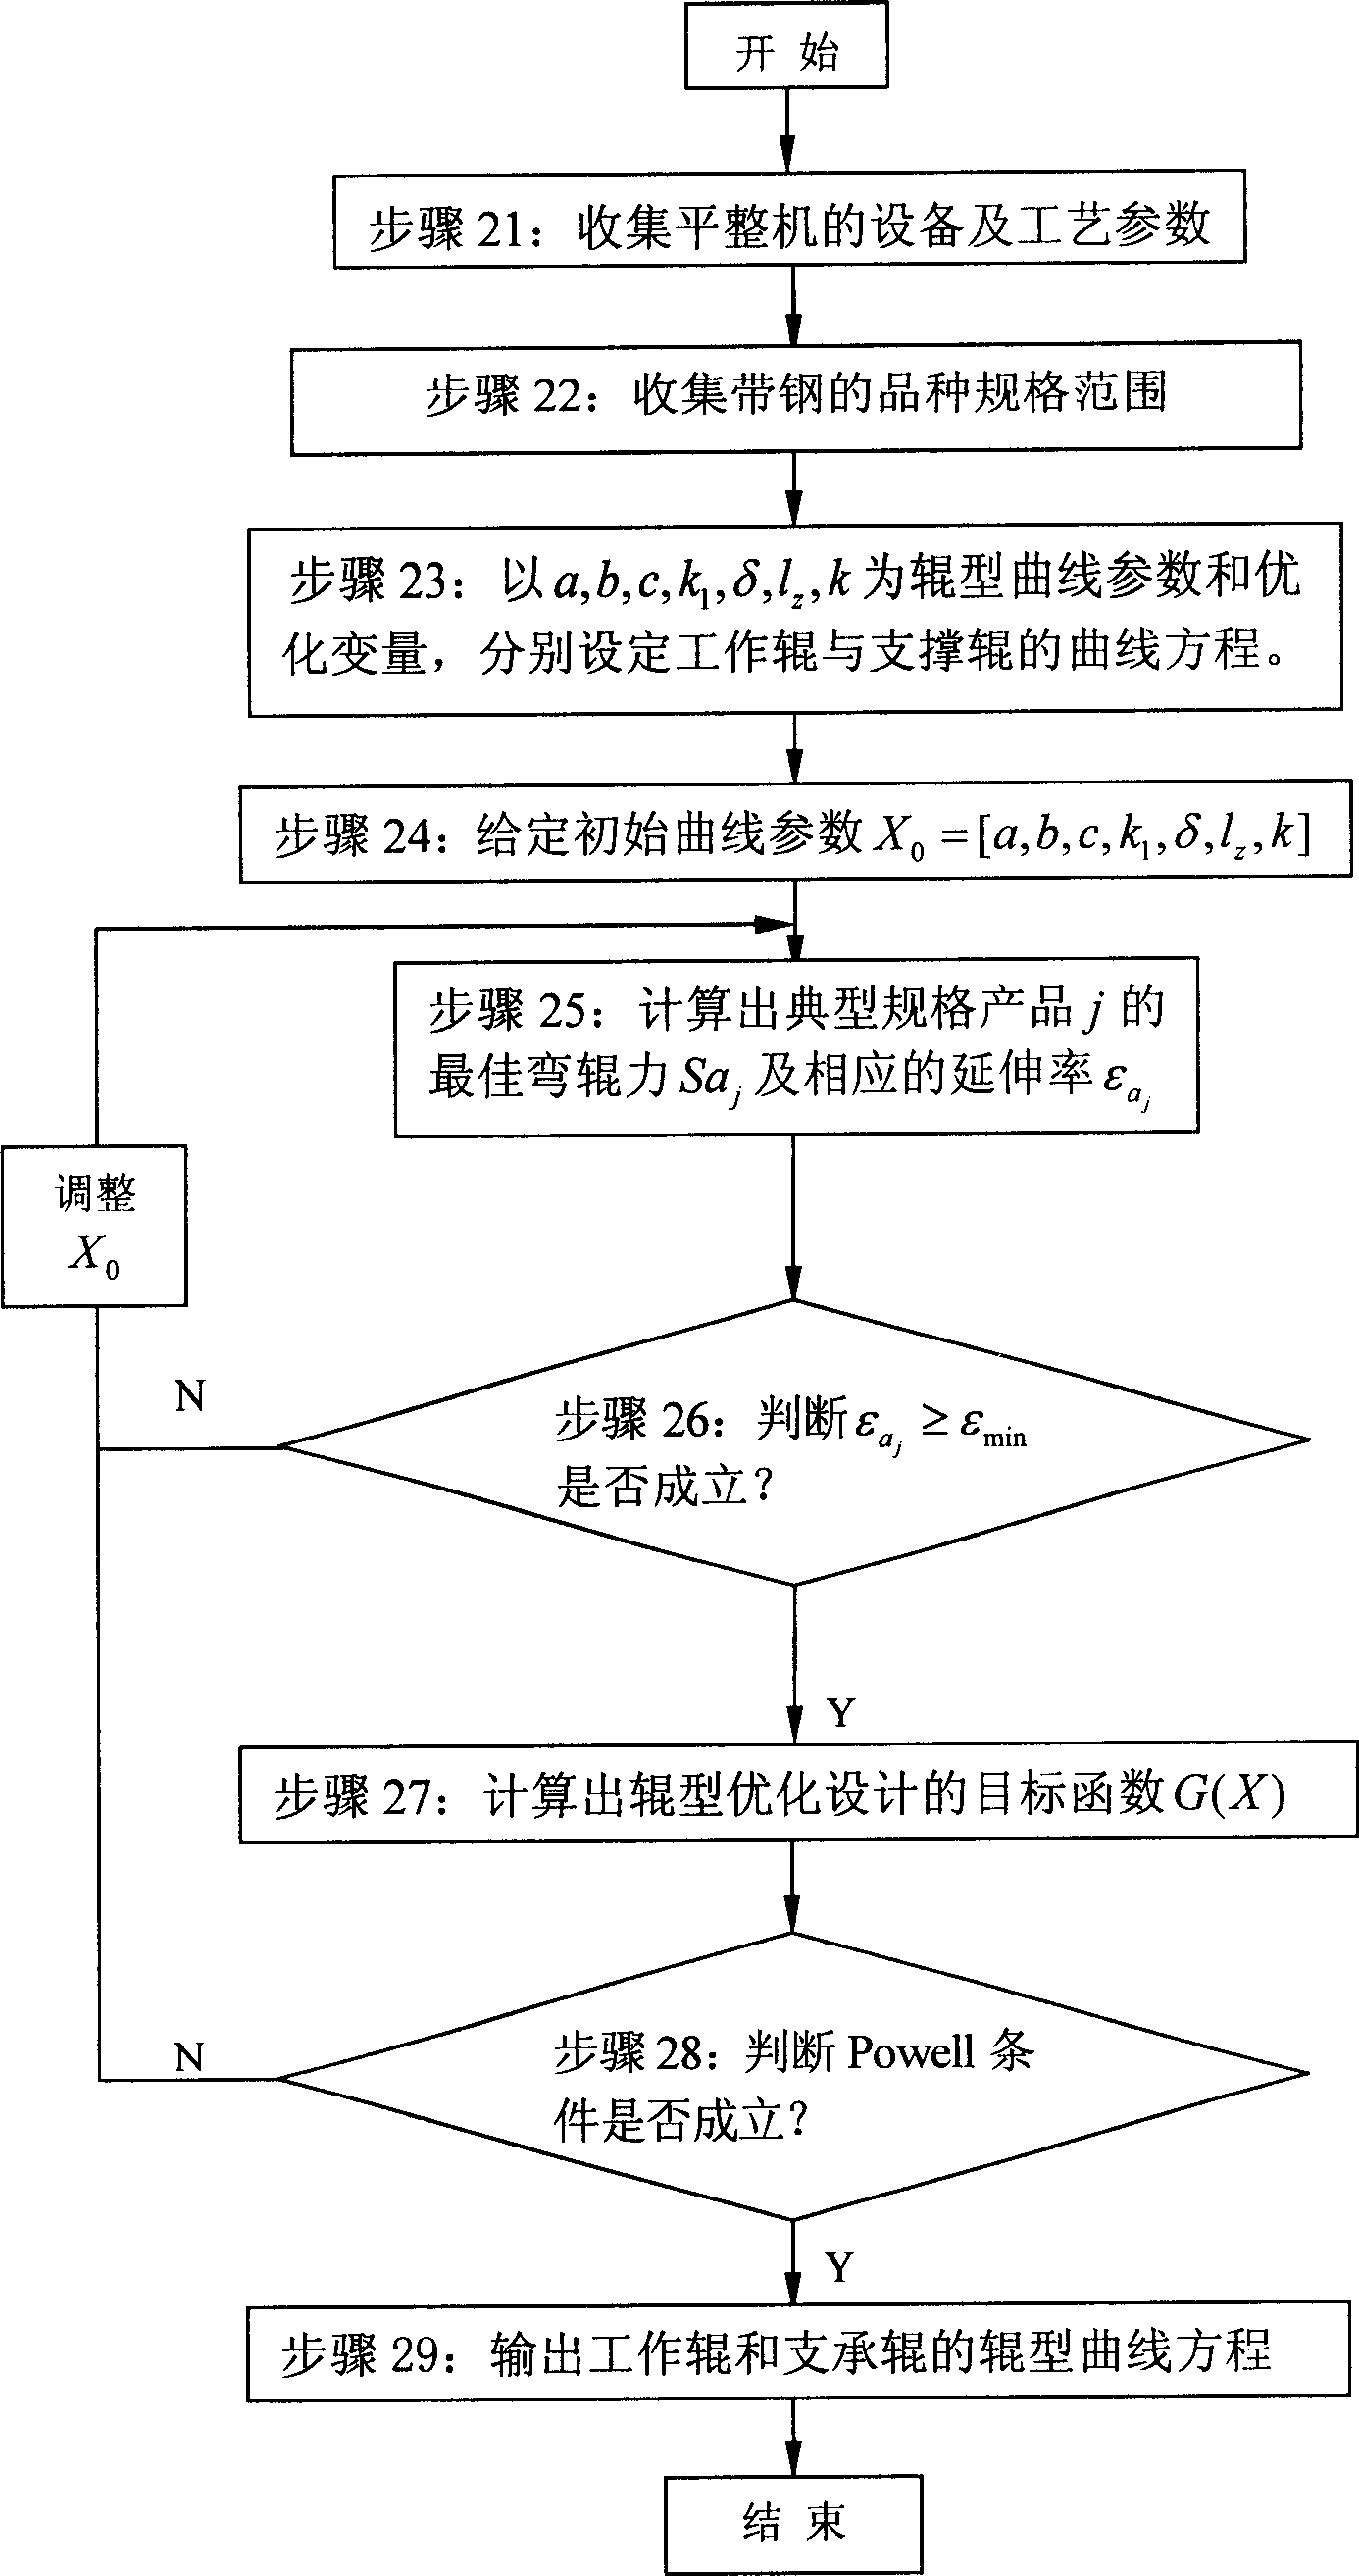 Roller type curve design method in thin narrow material smoothing and rolling process